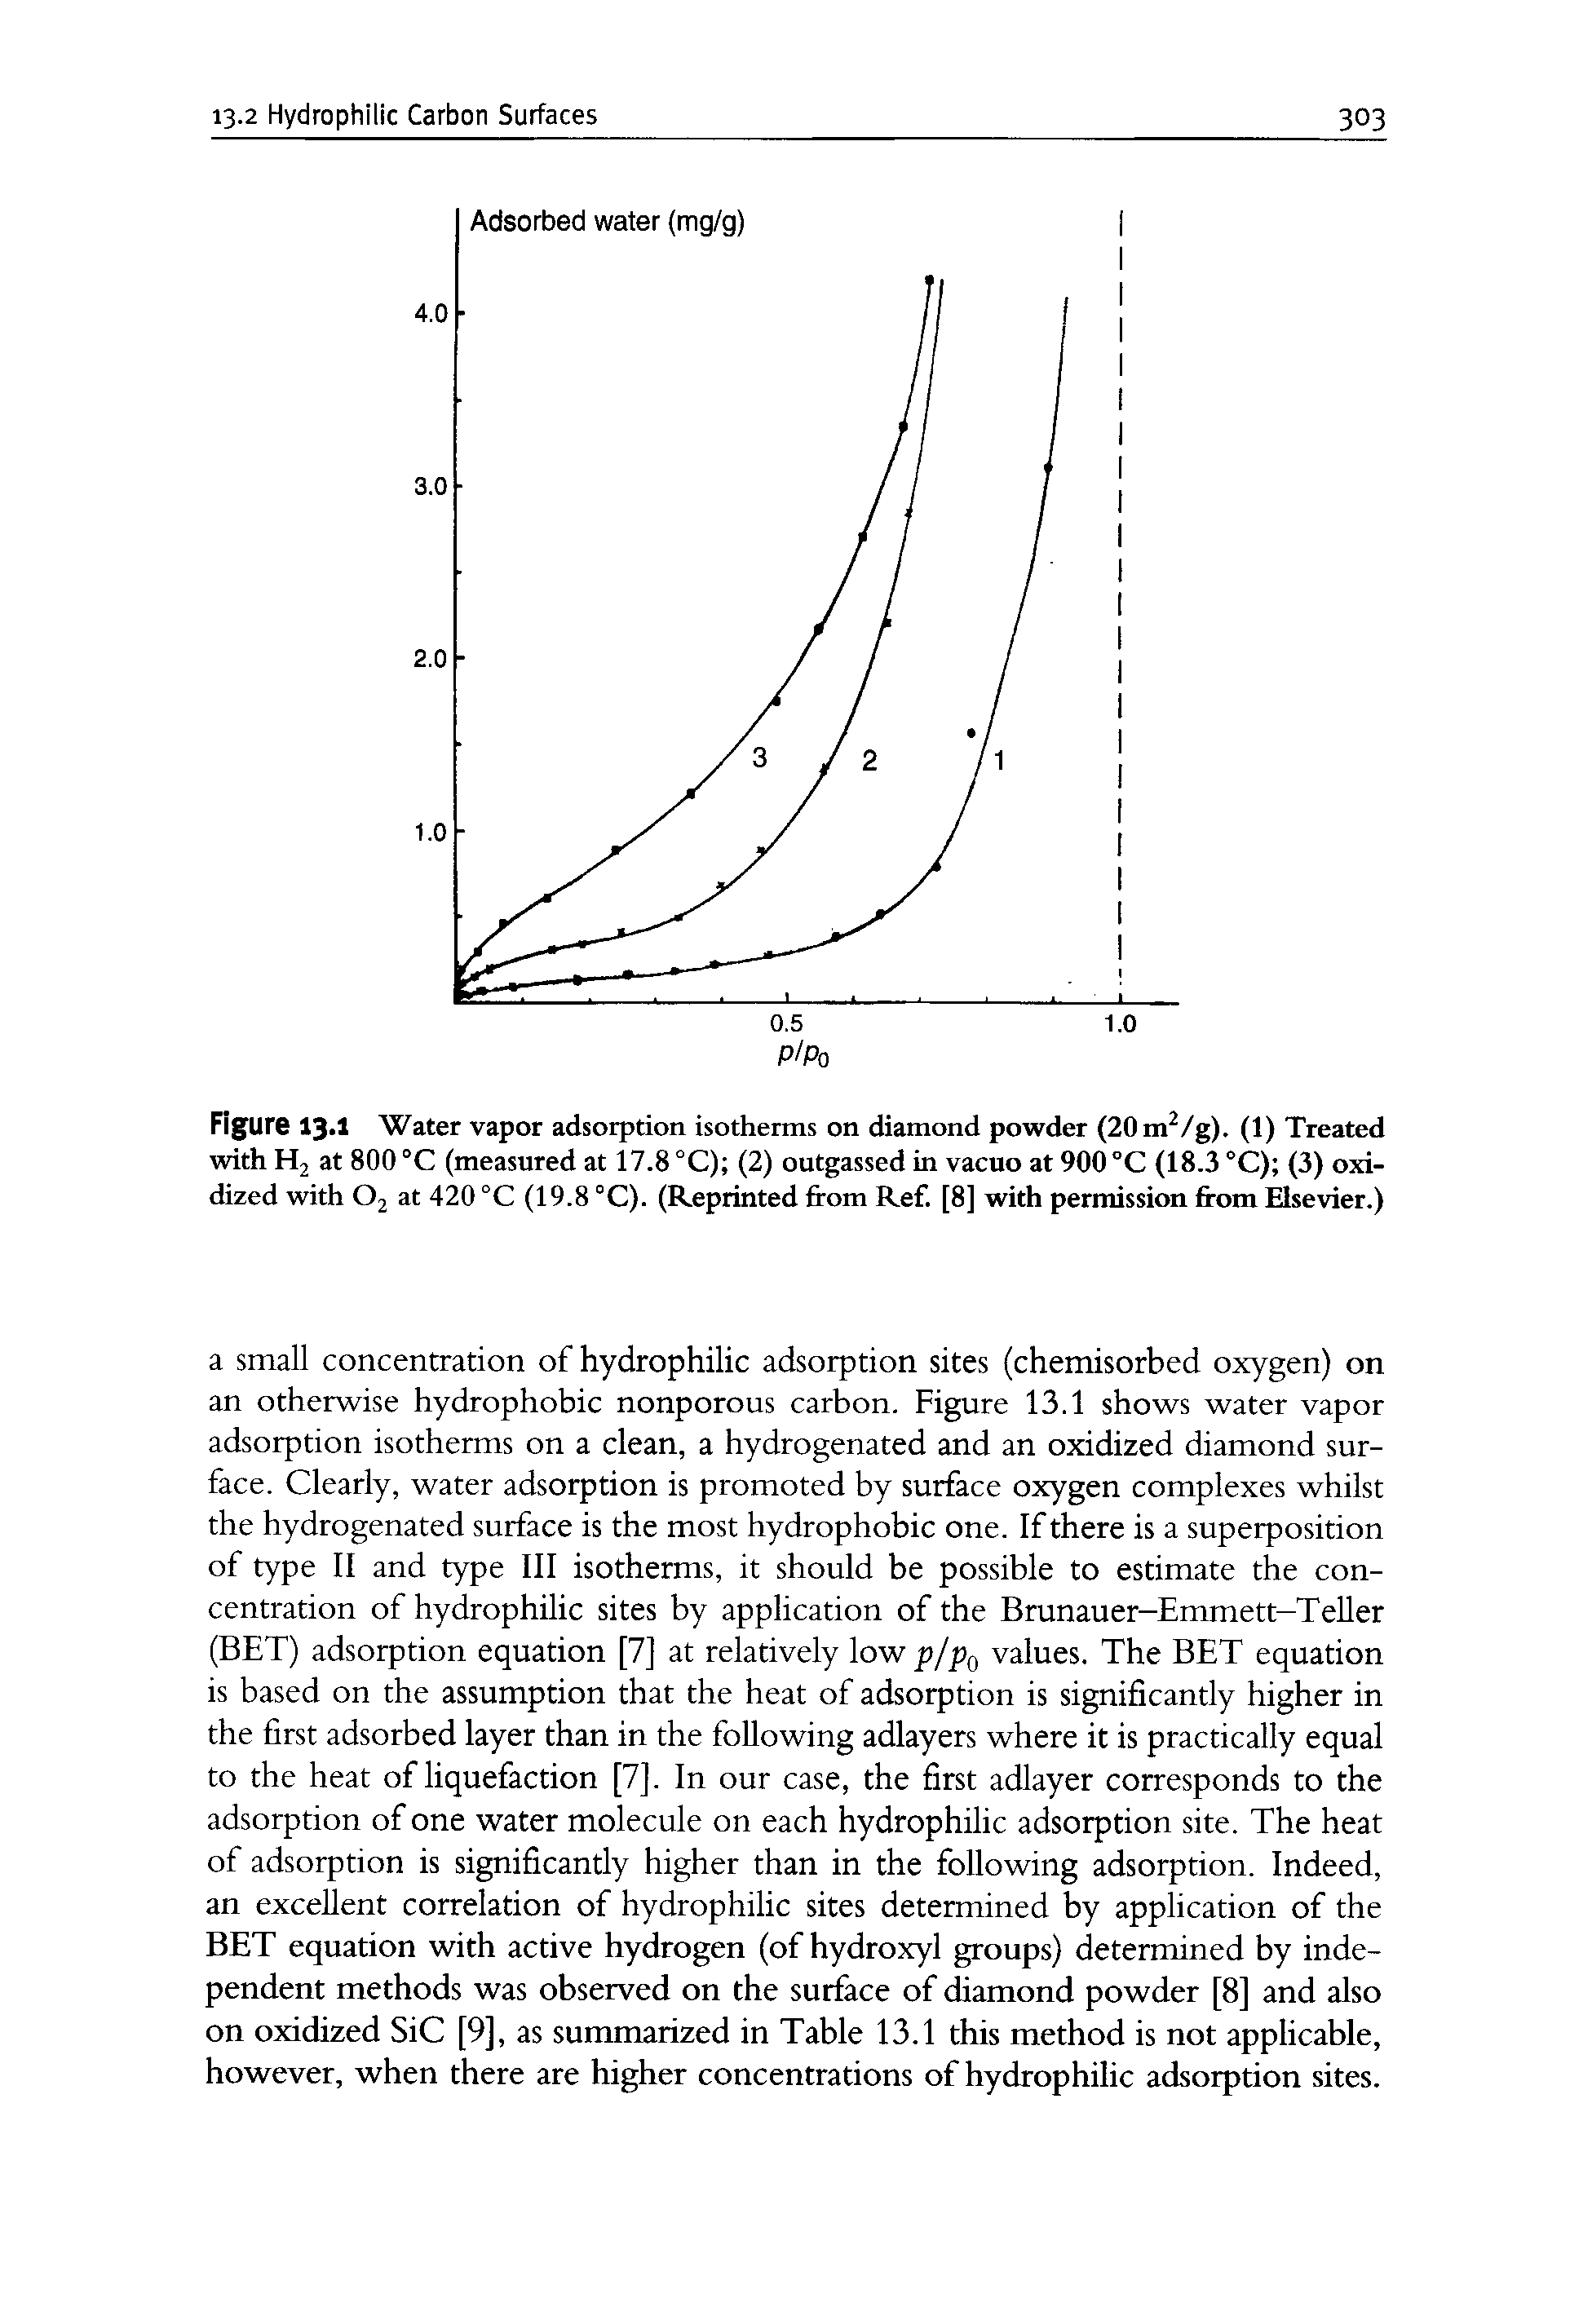 Figure 13.1 Water vapor adsorption isotherms on diamond powder (20m /g). (1) Treated with H2 at 800 °C (measured at 17.8 °C) (2) outgassed in vacuo at 900°C (18.3 °C) (3) oxidized with O2 at 420 °C (19.8 °C). (Reprinted from Ref. [8] with permission from Elsevier.)...